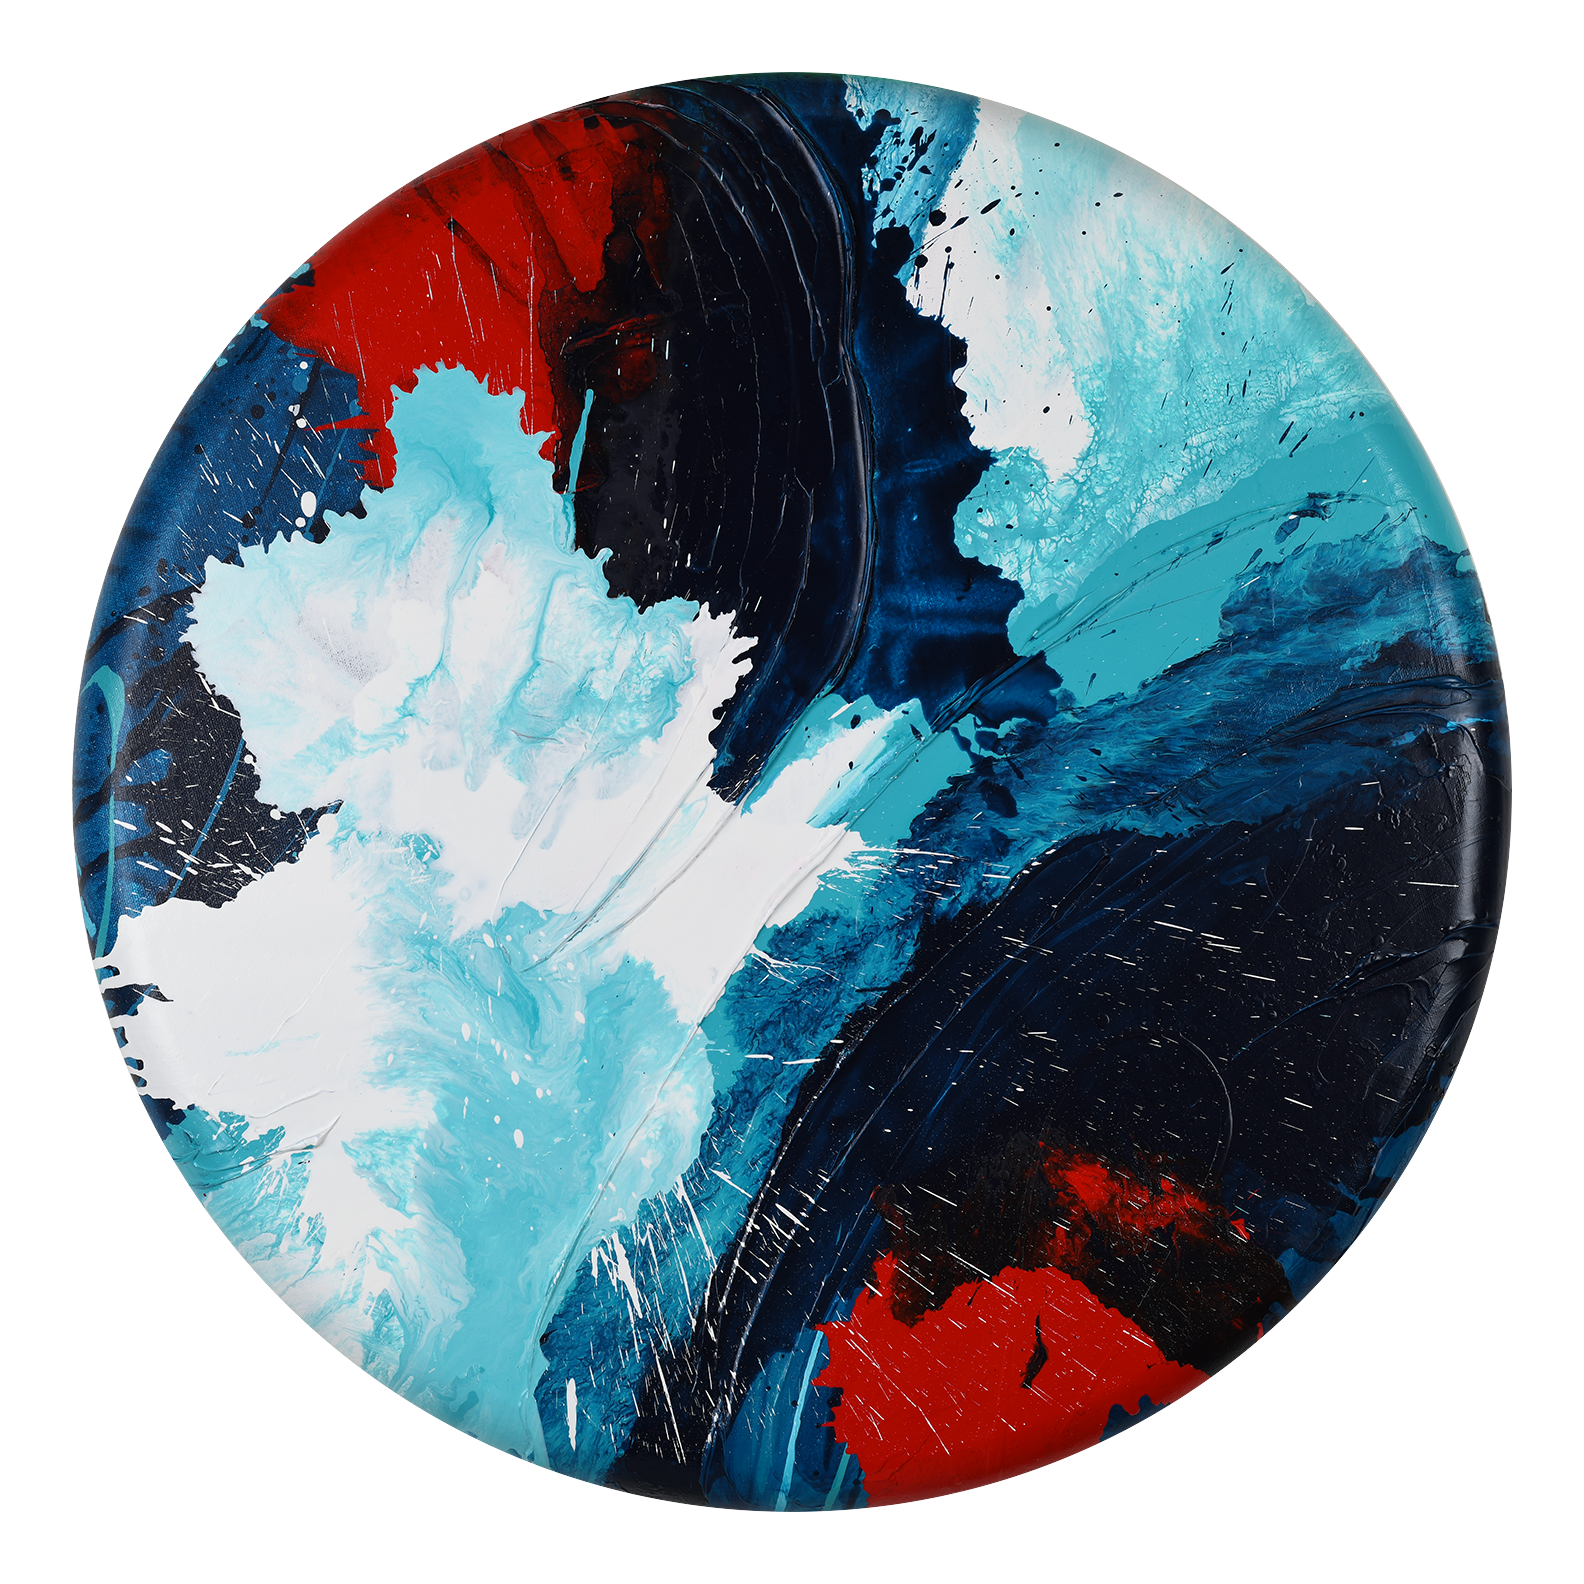 Full view of the abstract, expressionism, acrylic painting: overlapping explosions of dark blue, turquoise, bright red and white on a Convexo, curved-edge canvas